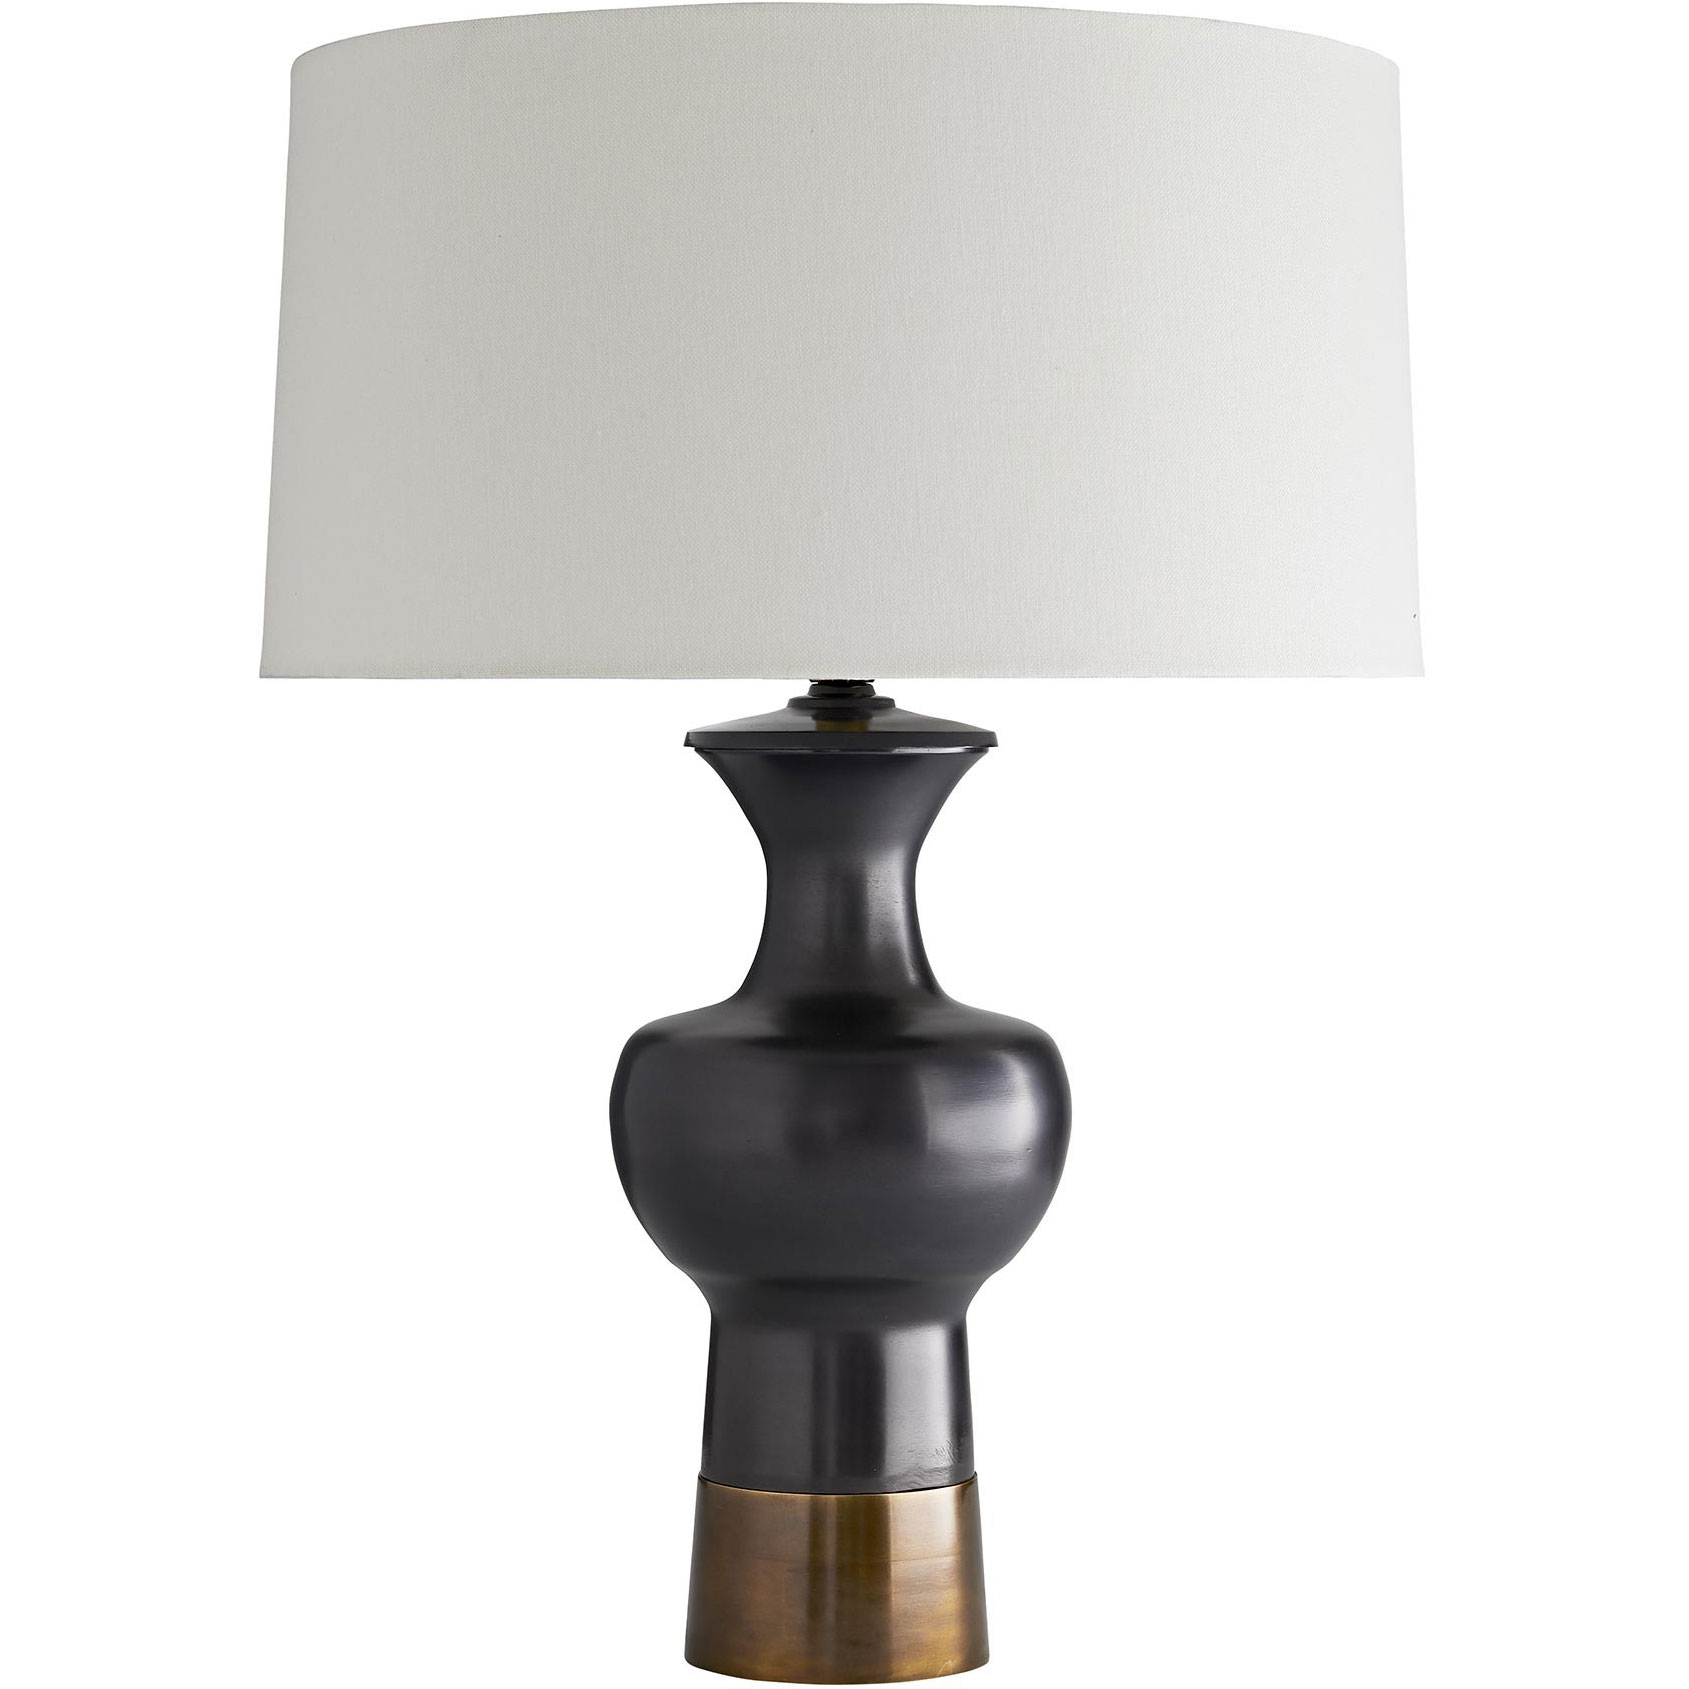 Pablo Table Lamp By Arteriors Home Ah, Arteriors Glass Table Lamp